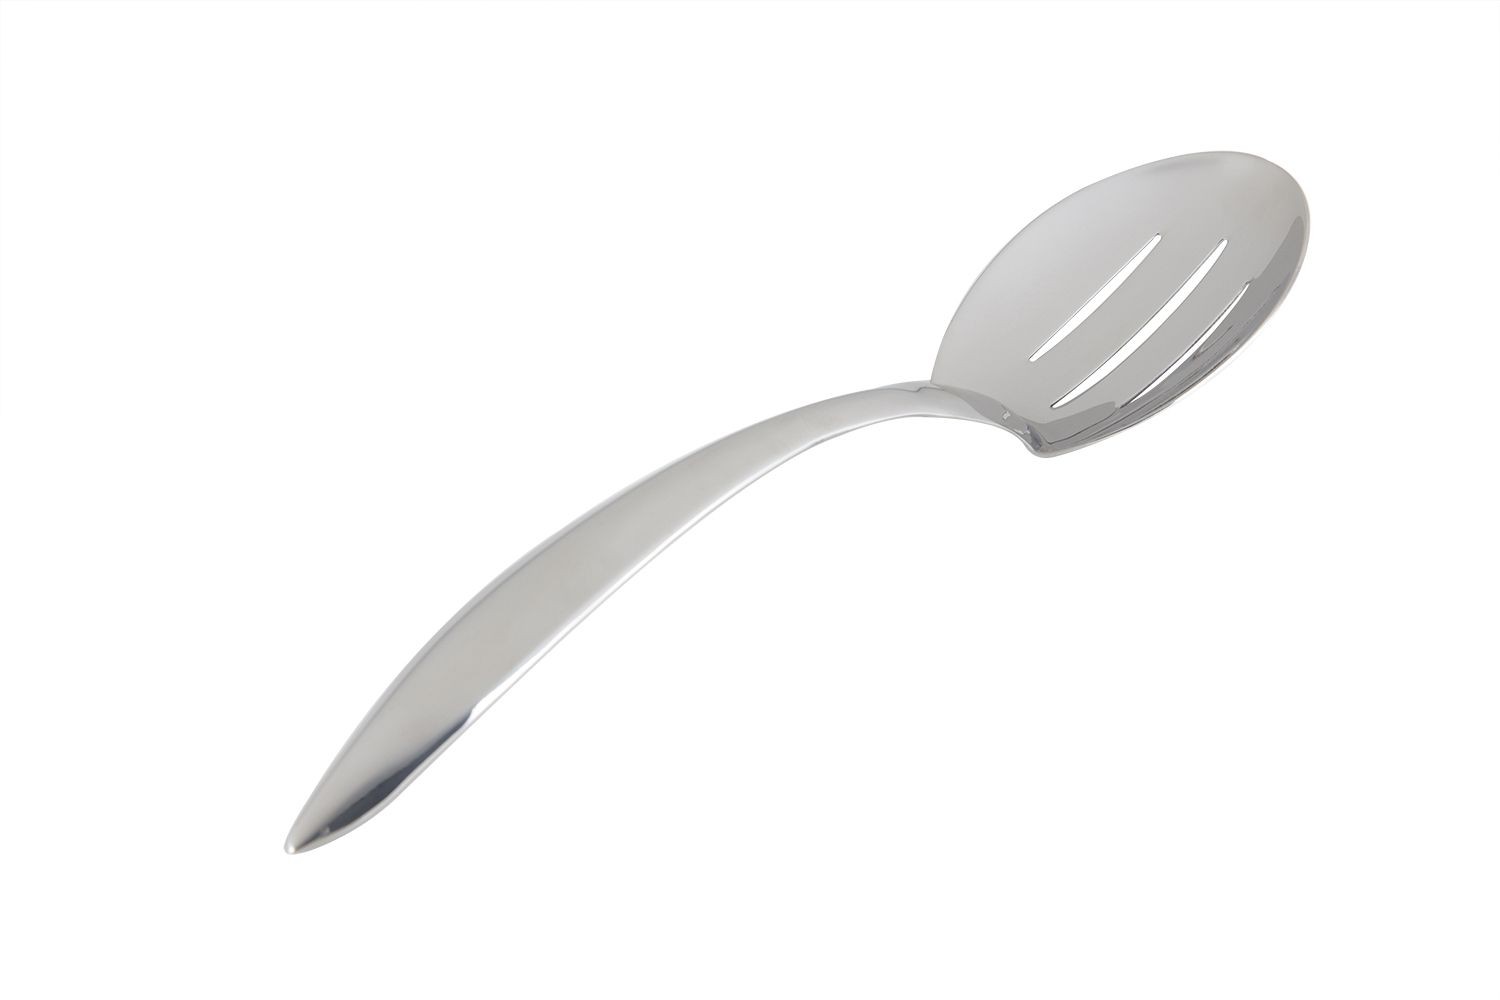 Bon Chef 9464 EZ Use Banquet Serving Slotted Spoon with Hollow Cool Handle, 9 3/4"